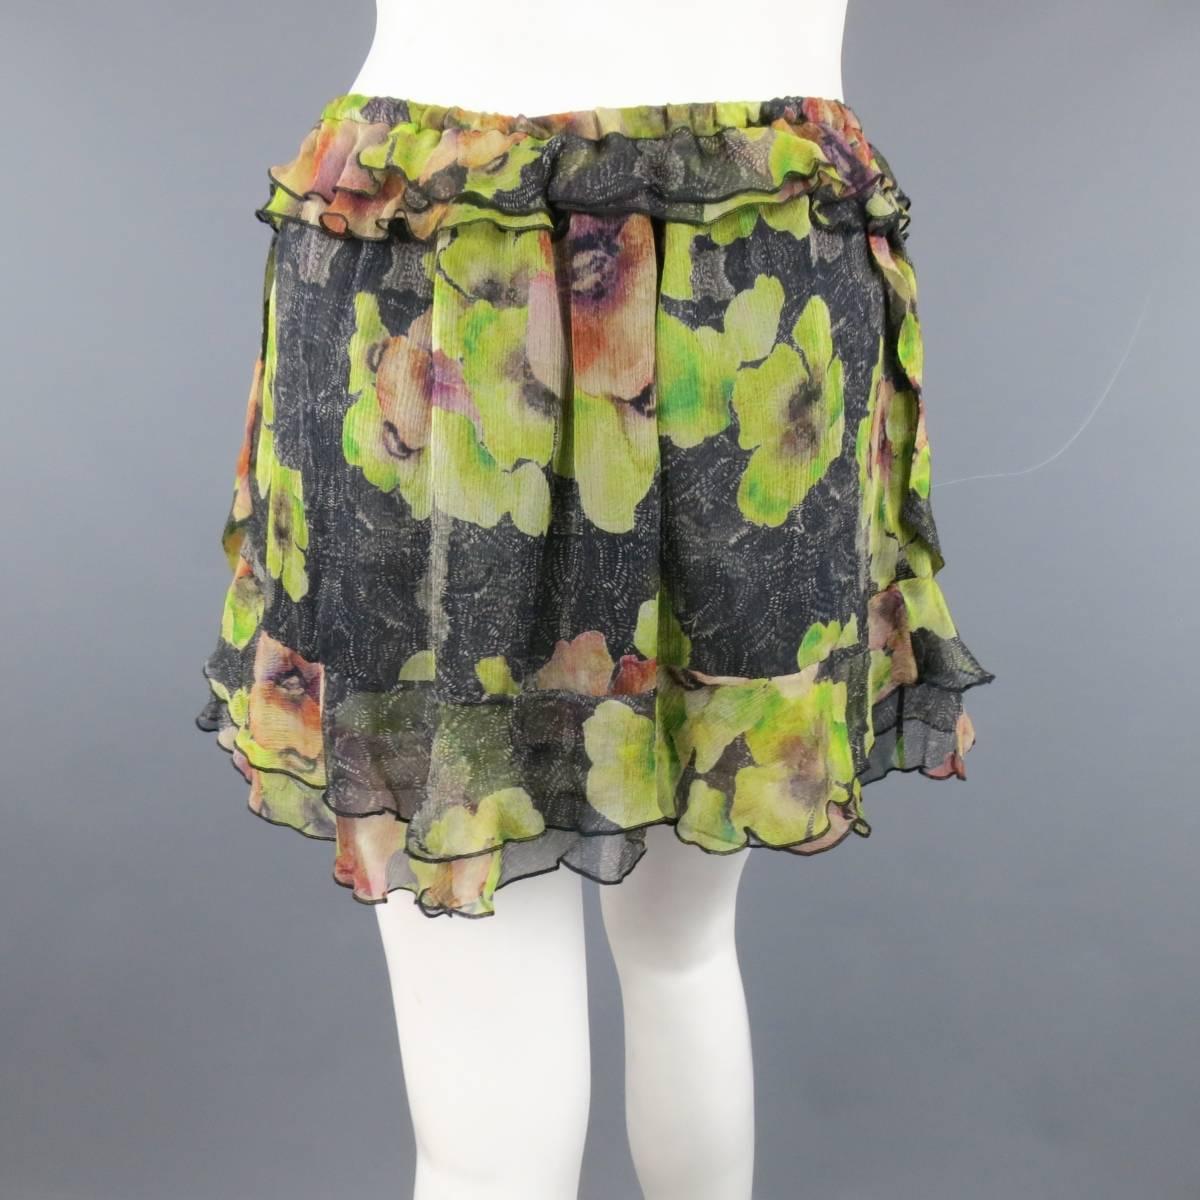 ISABEL MARANT mini skirt in a light weight black and green floral print silk chiffon featuring an elastic waistband, and cascading ruffled layers. Made in Poland.
 
New with Tags. Retails at $750.00.
Marked: IT 40
 
Measurements:
 
Waist: 27